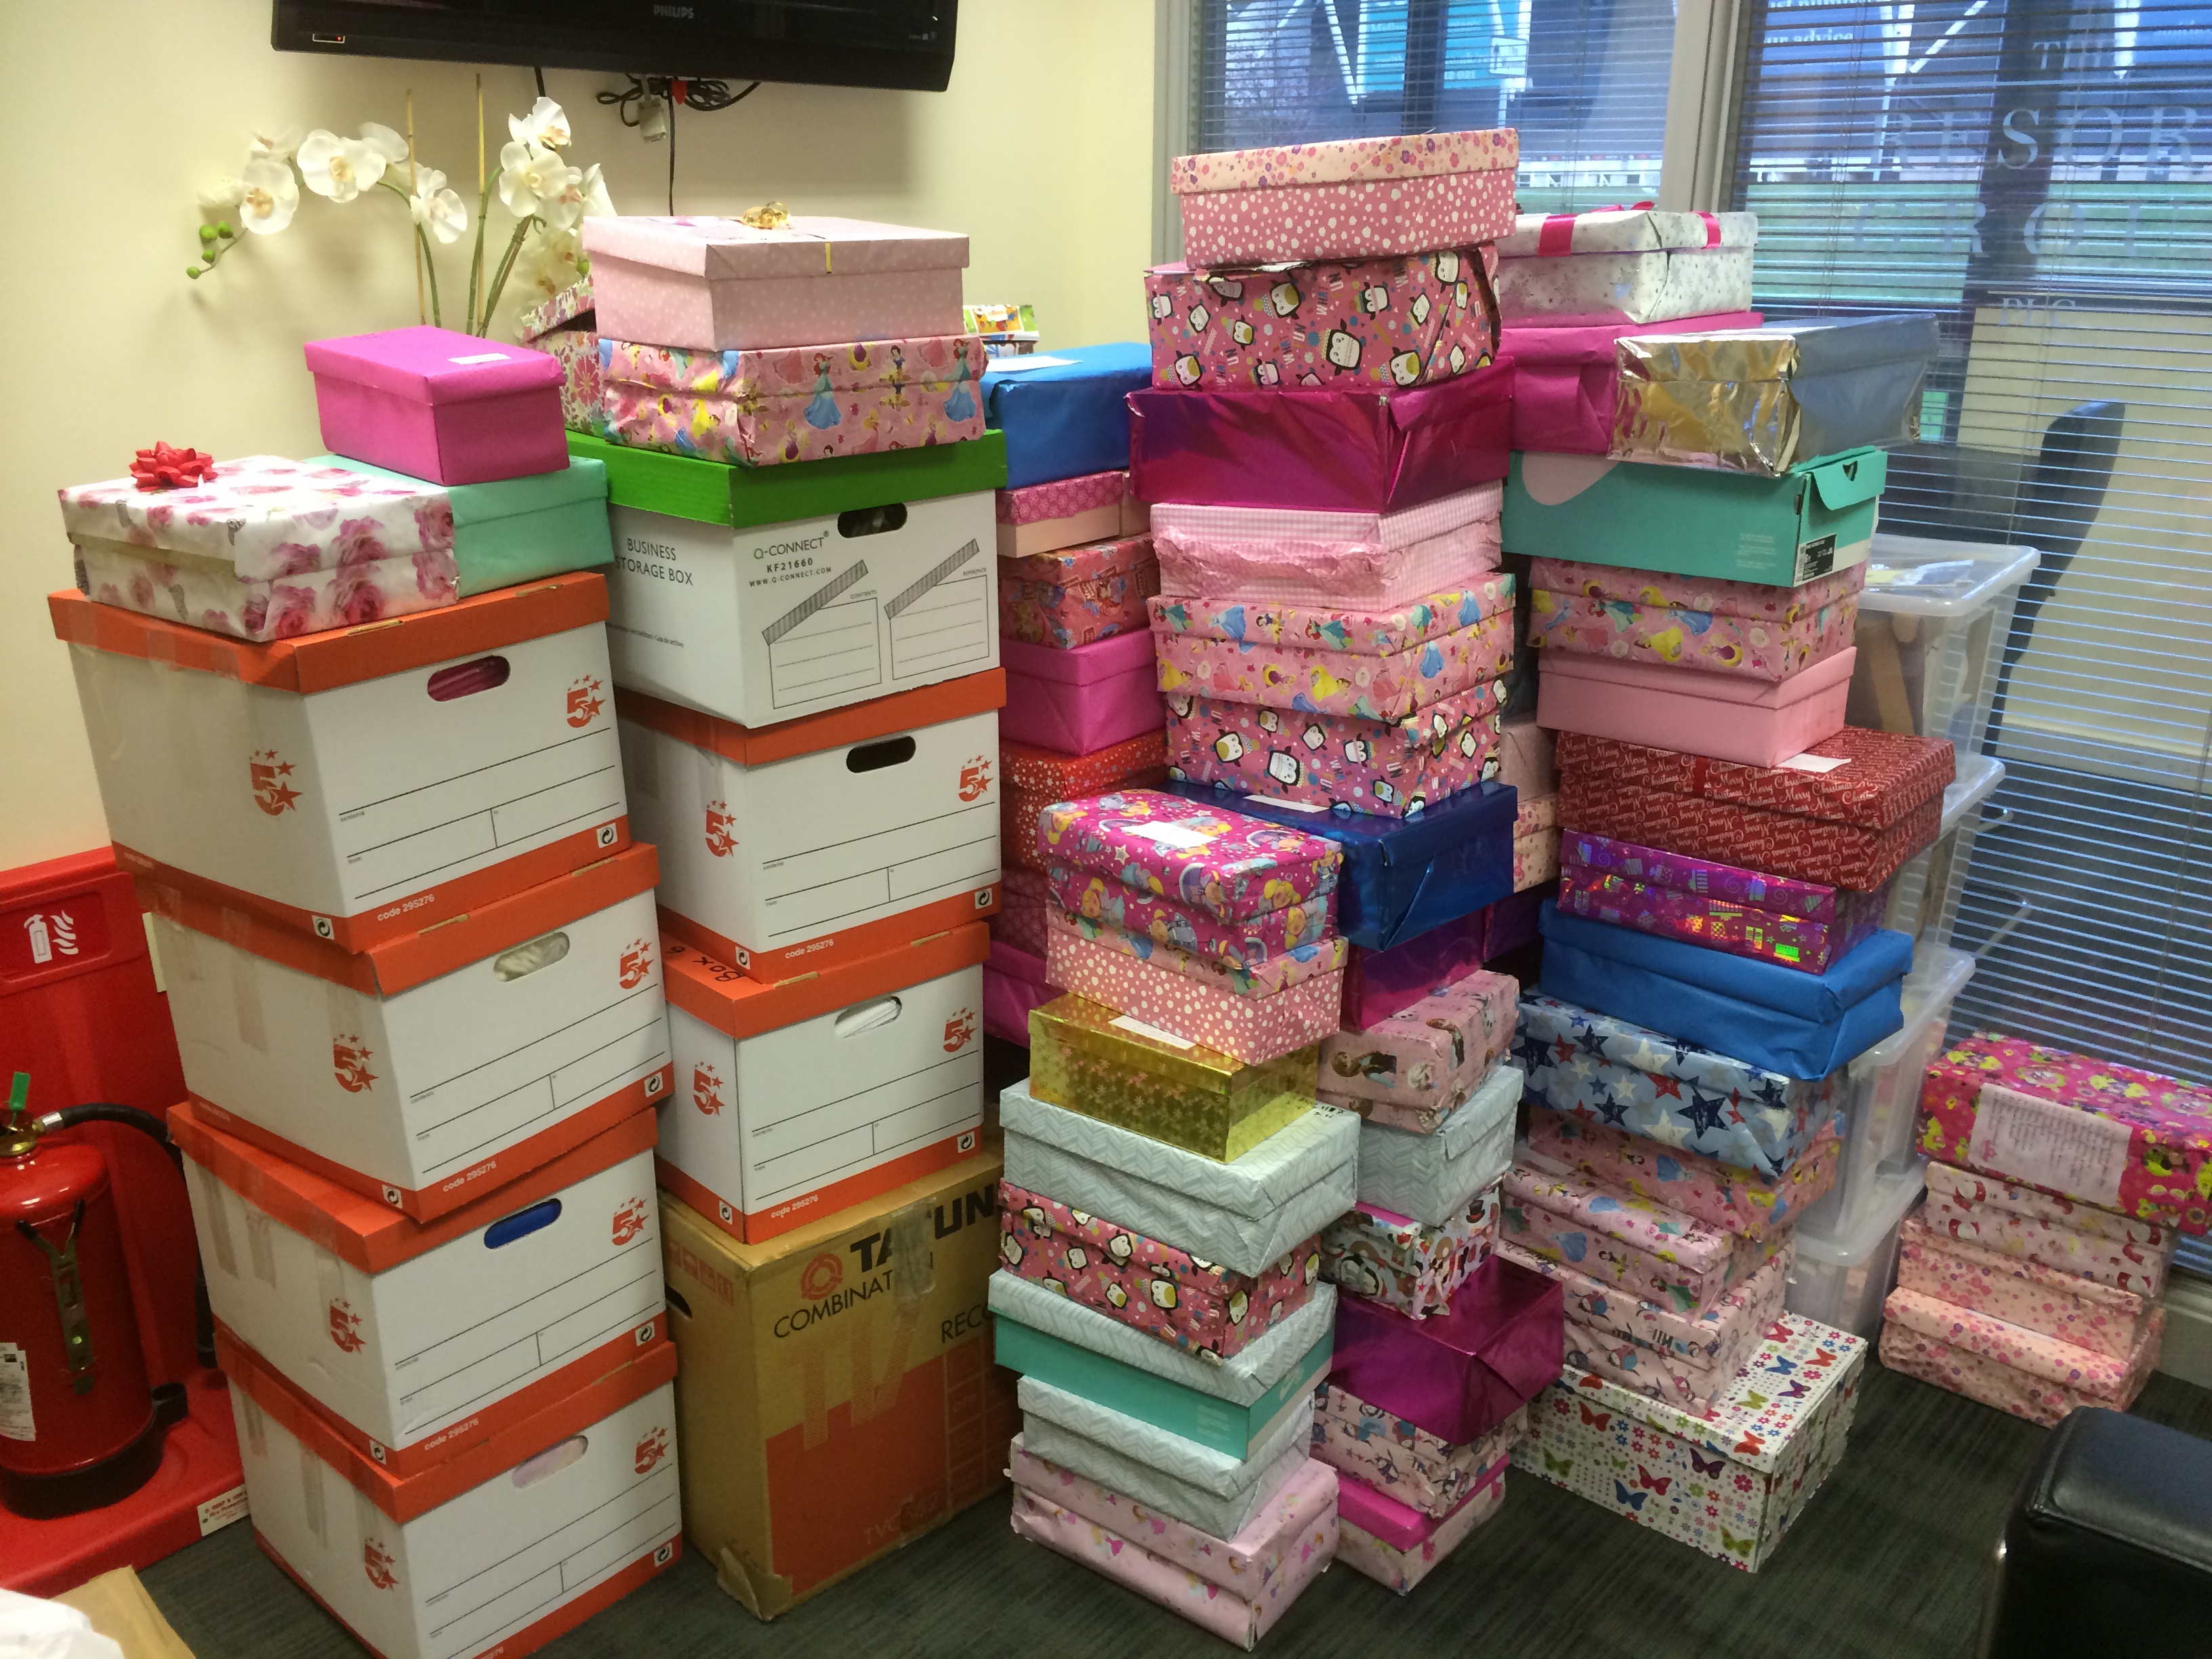 Charity Christmas shoeboxes ready to send to Cape Verde Cape Verde